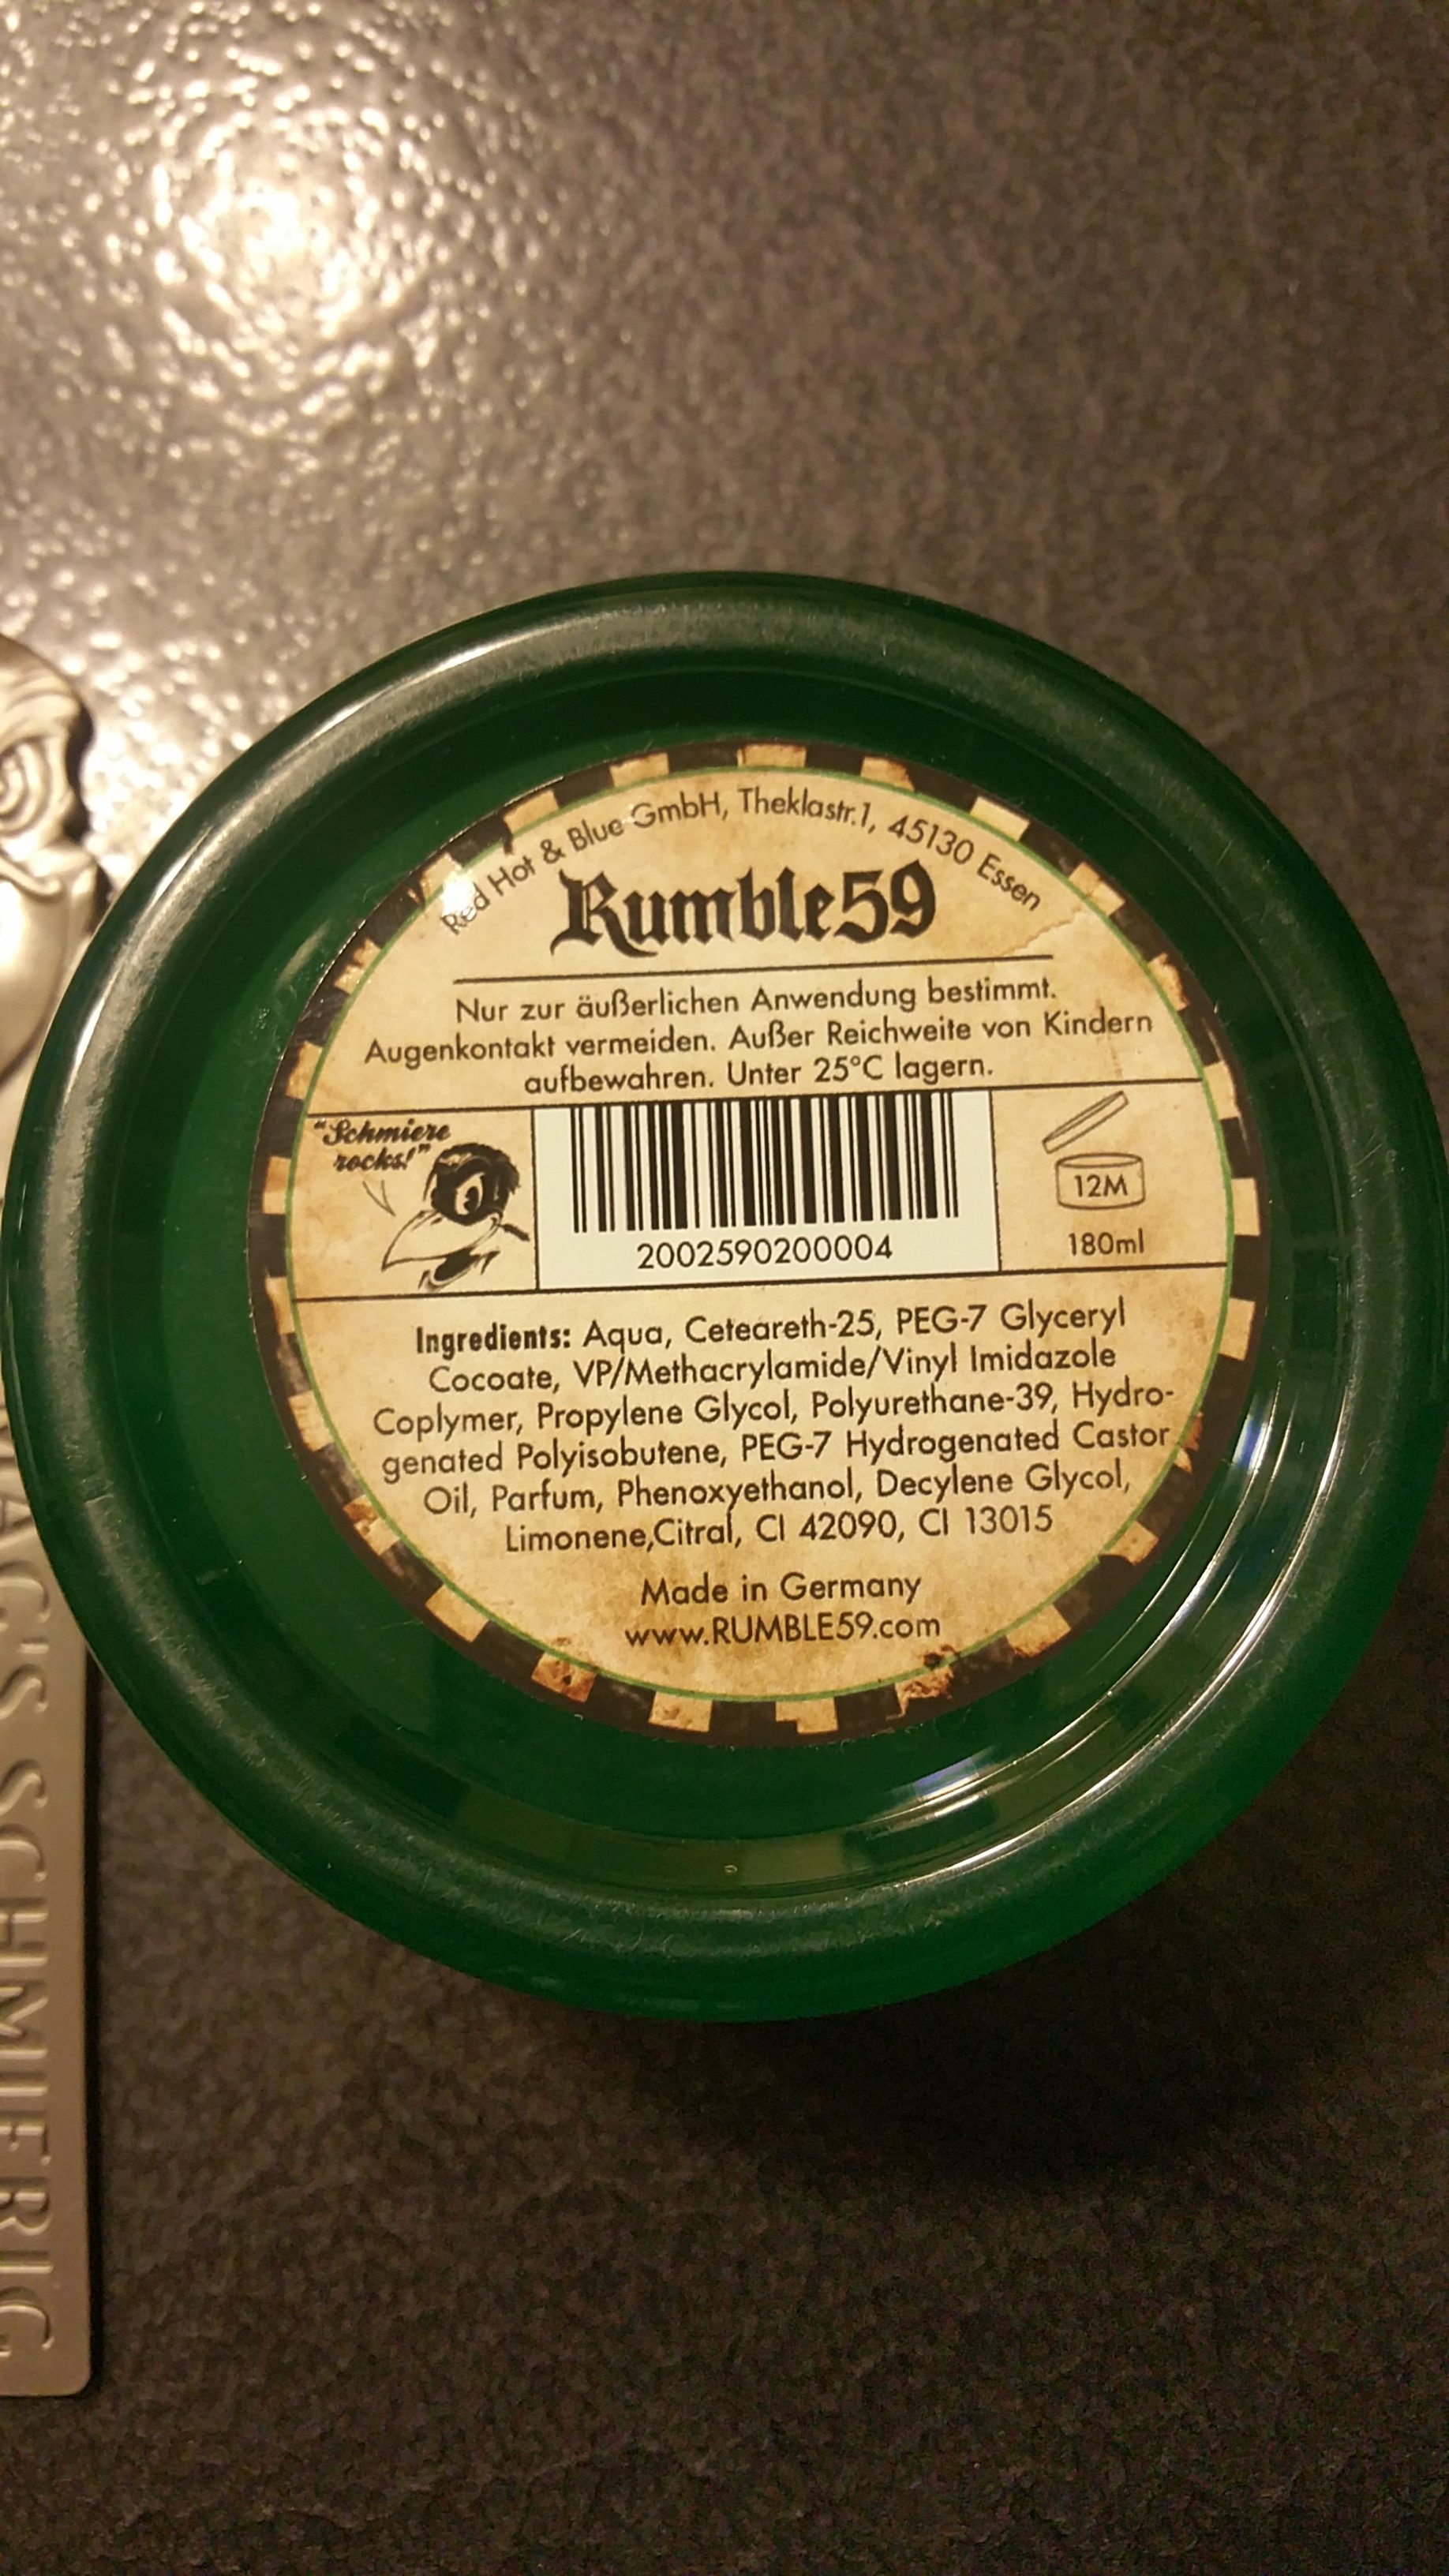 Rumble 59 Schmiere Water Pomade